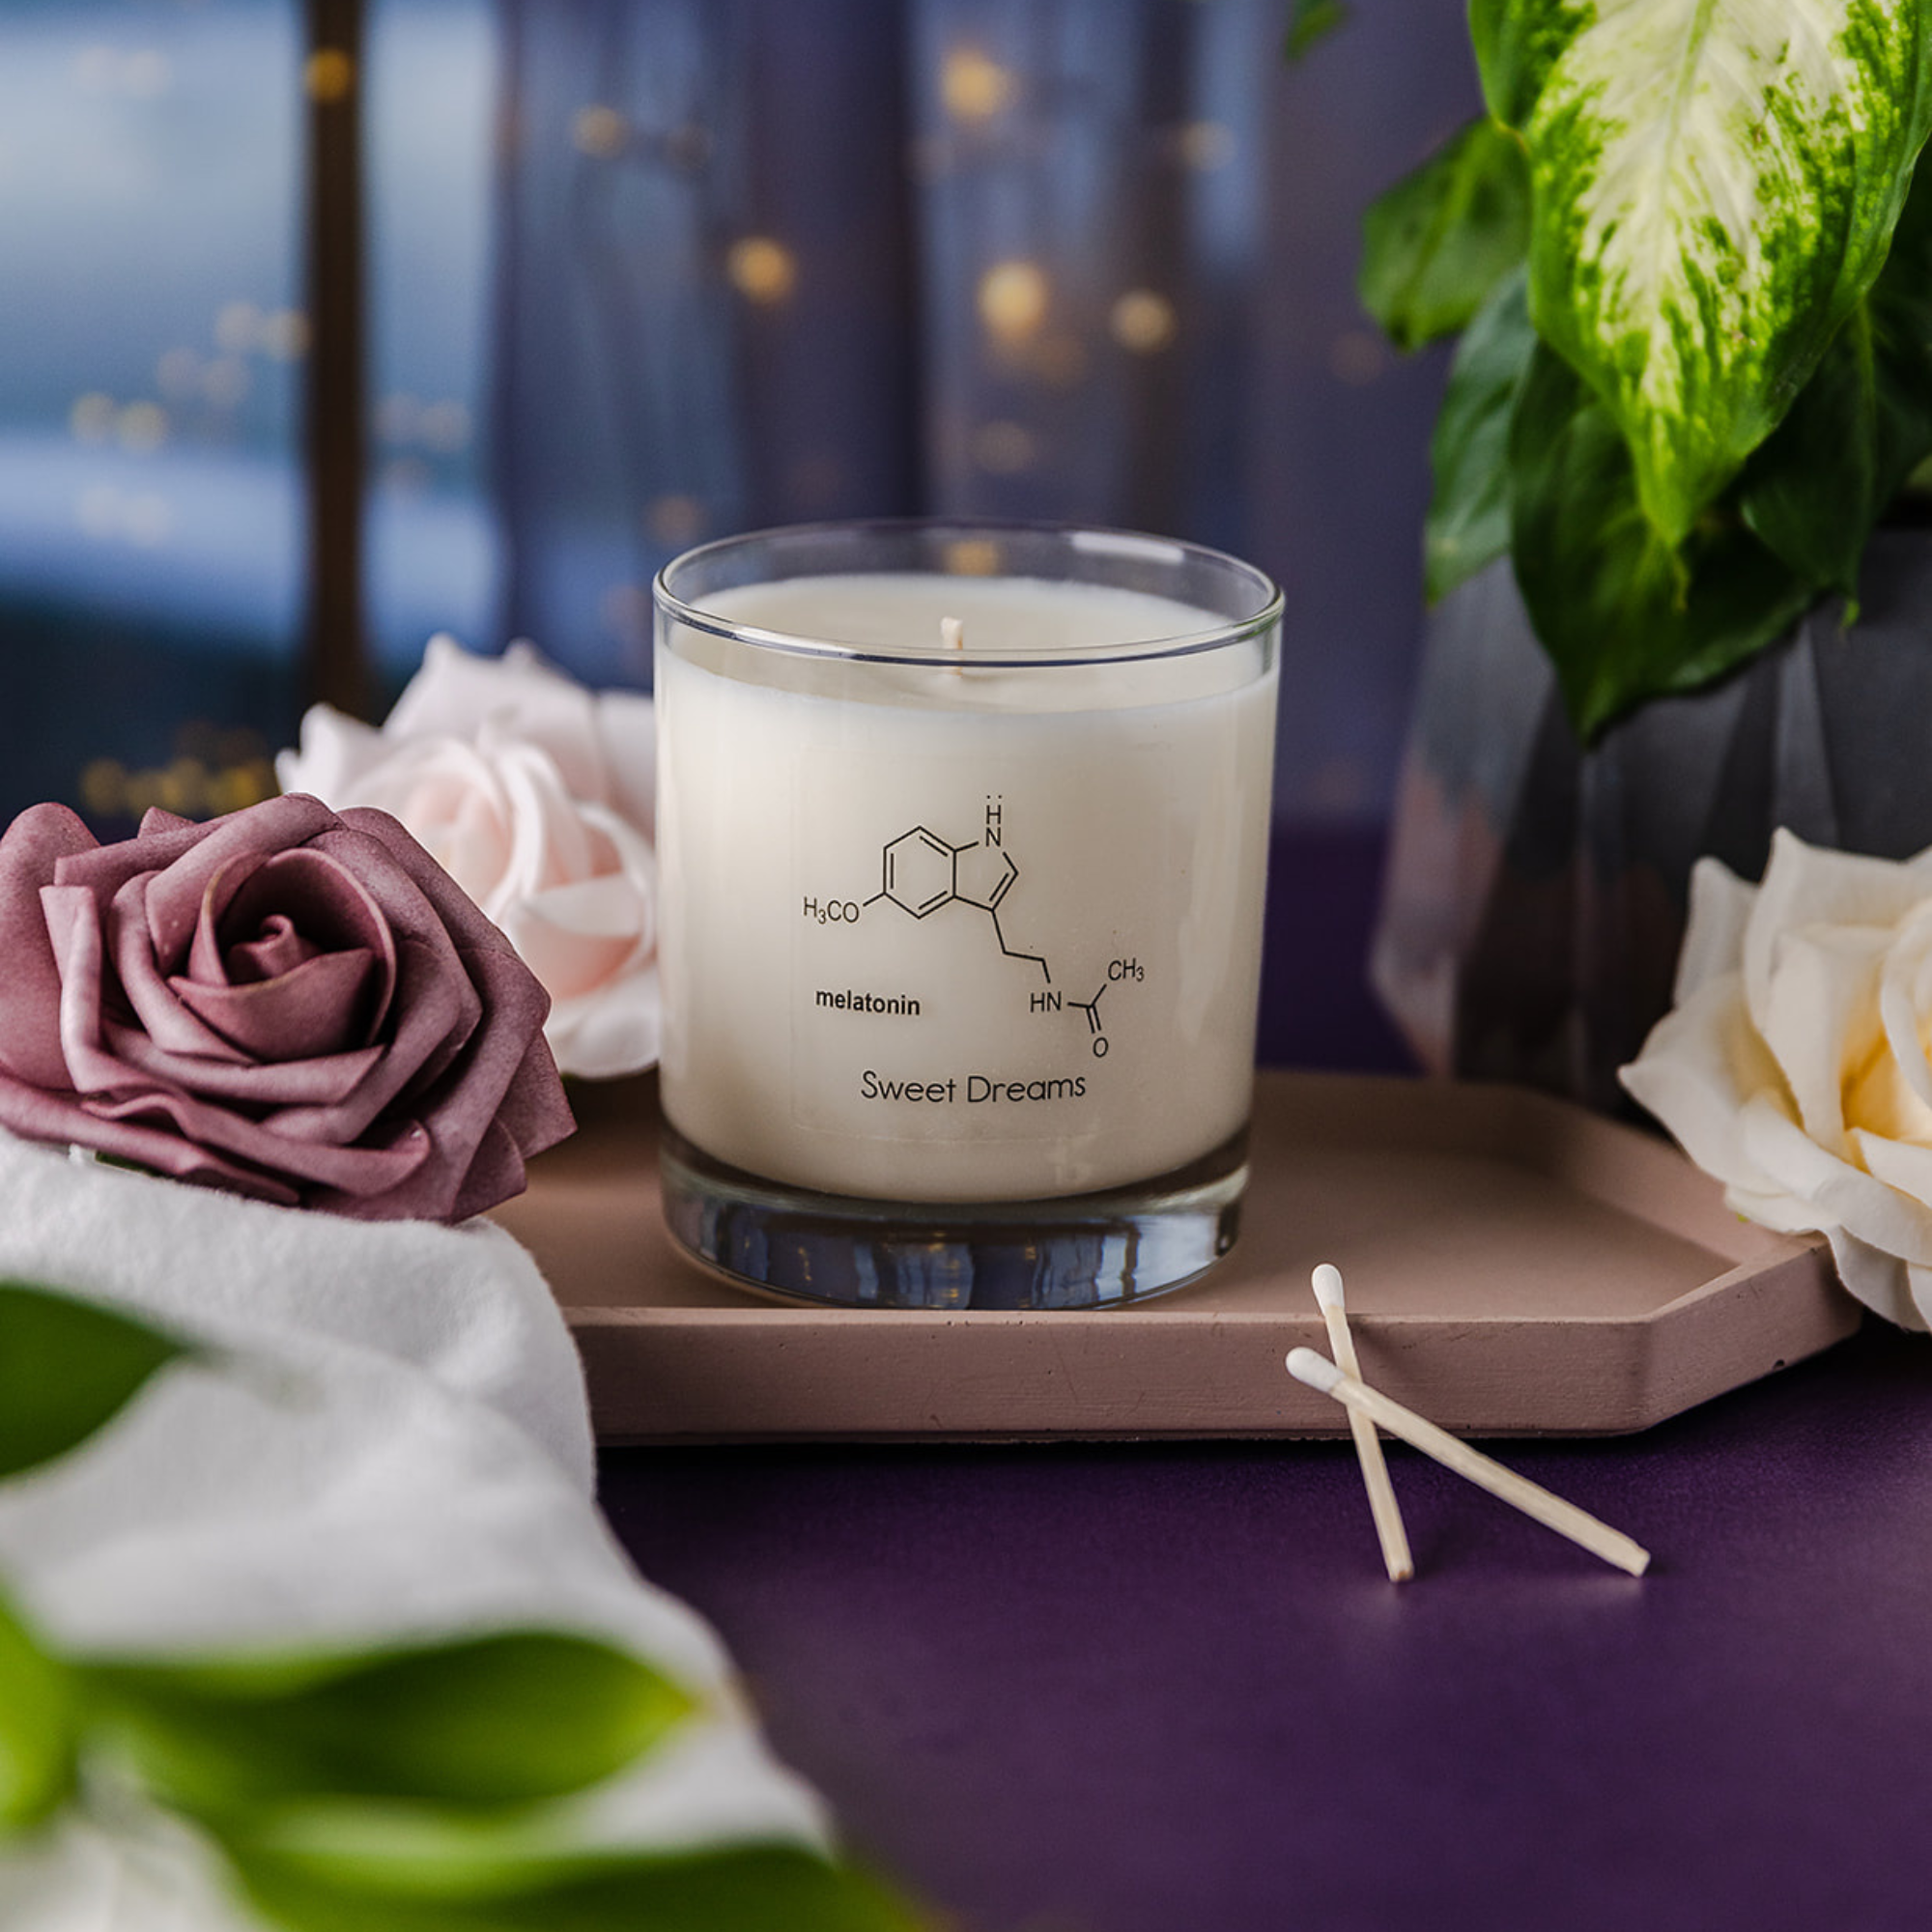 Glass Jar Candle with the molecule melatonin says sweet dreams. It is surrounded by beautiful roses on a dark purple table, two wooden matches in front of the candle and a curtain with fairy lights in the background